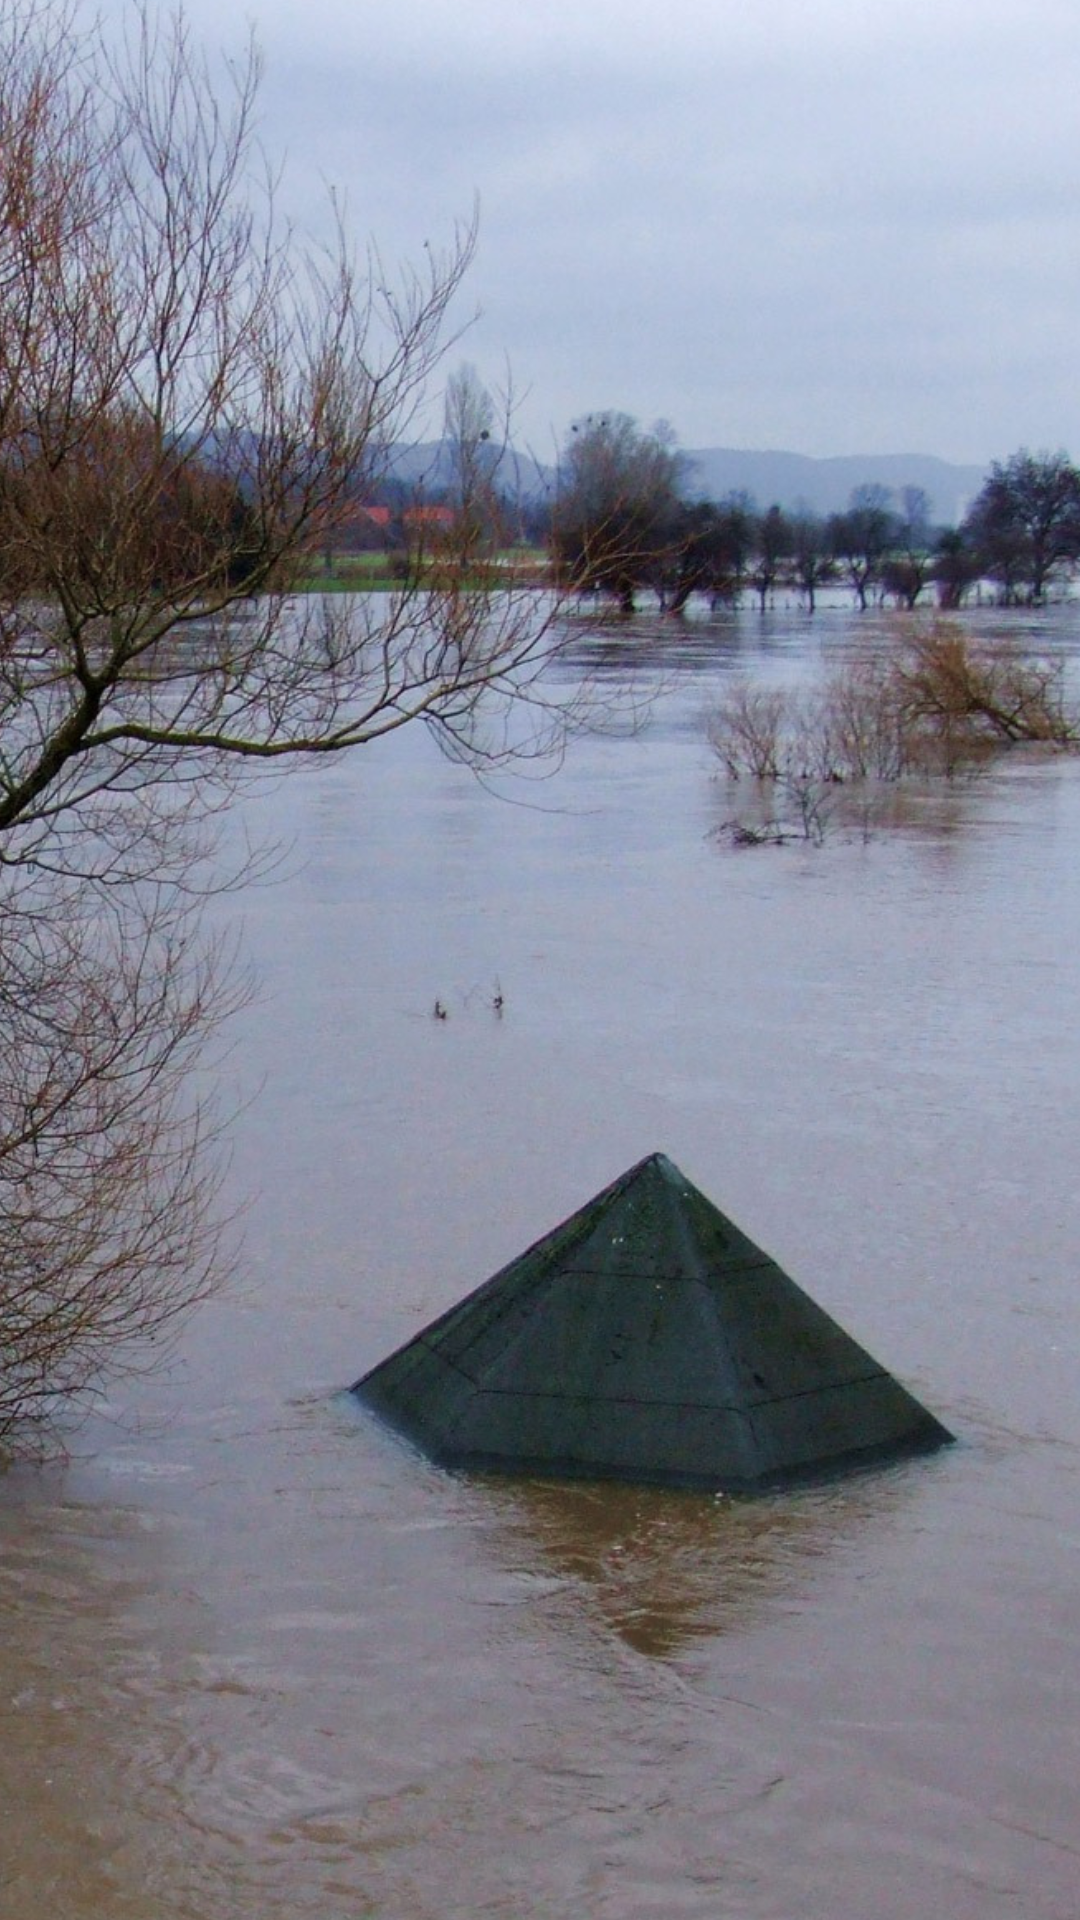 The roof of a house surrounded by brown flood waters sticks up above the water line.